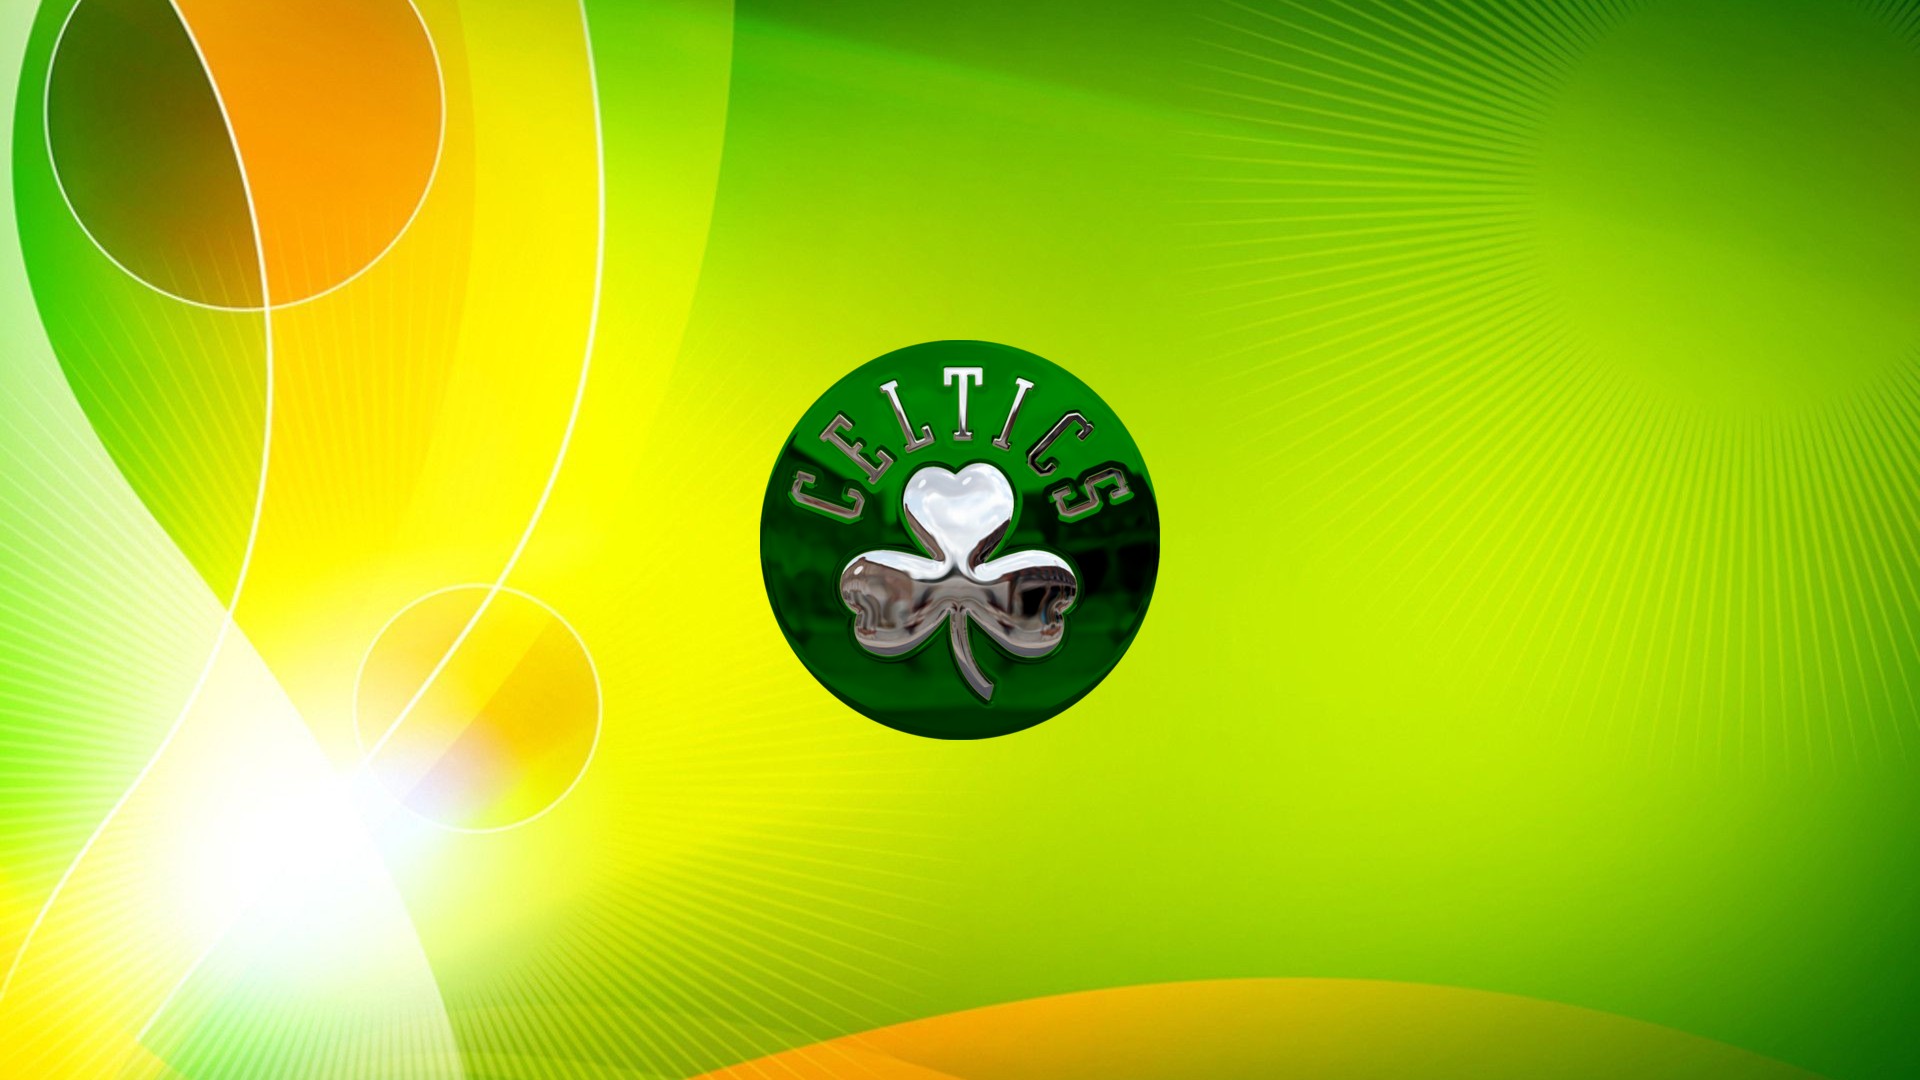 Boston Celtics Background Wallpaper HD with image resolution 1920x1080 pixel. You can make this wallpaper for your Desktop Computer Backgrounds, Mac Wallpapers, Android Lock screen or iPhone Screensavers